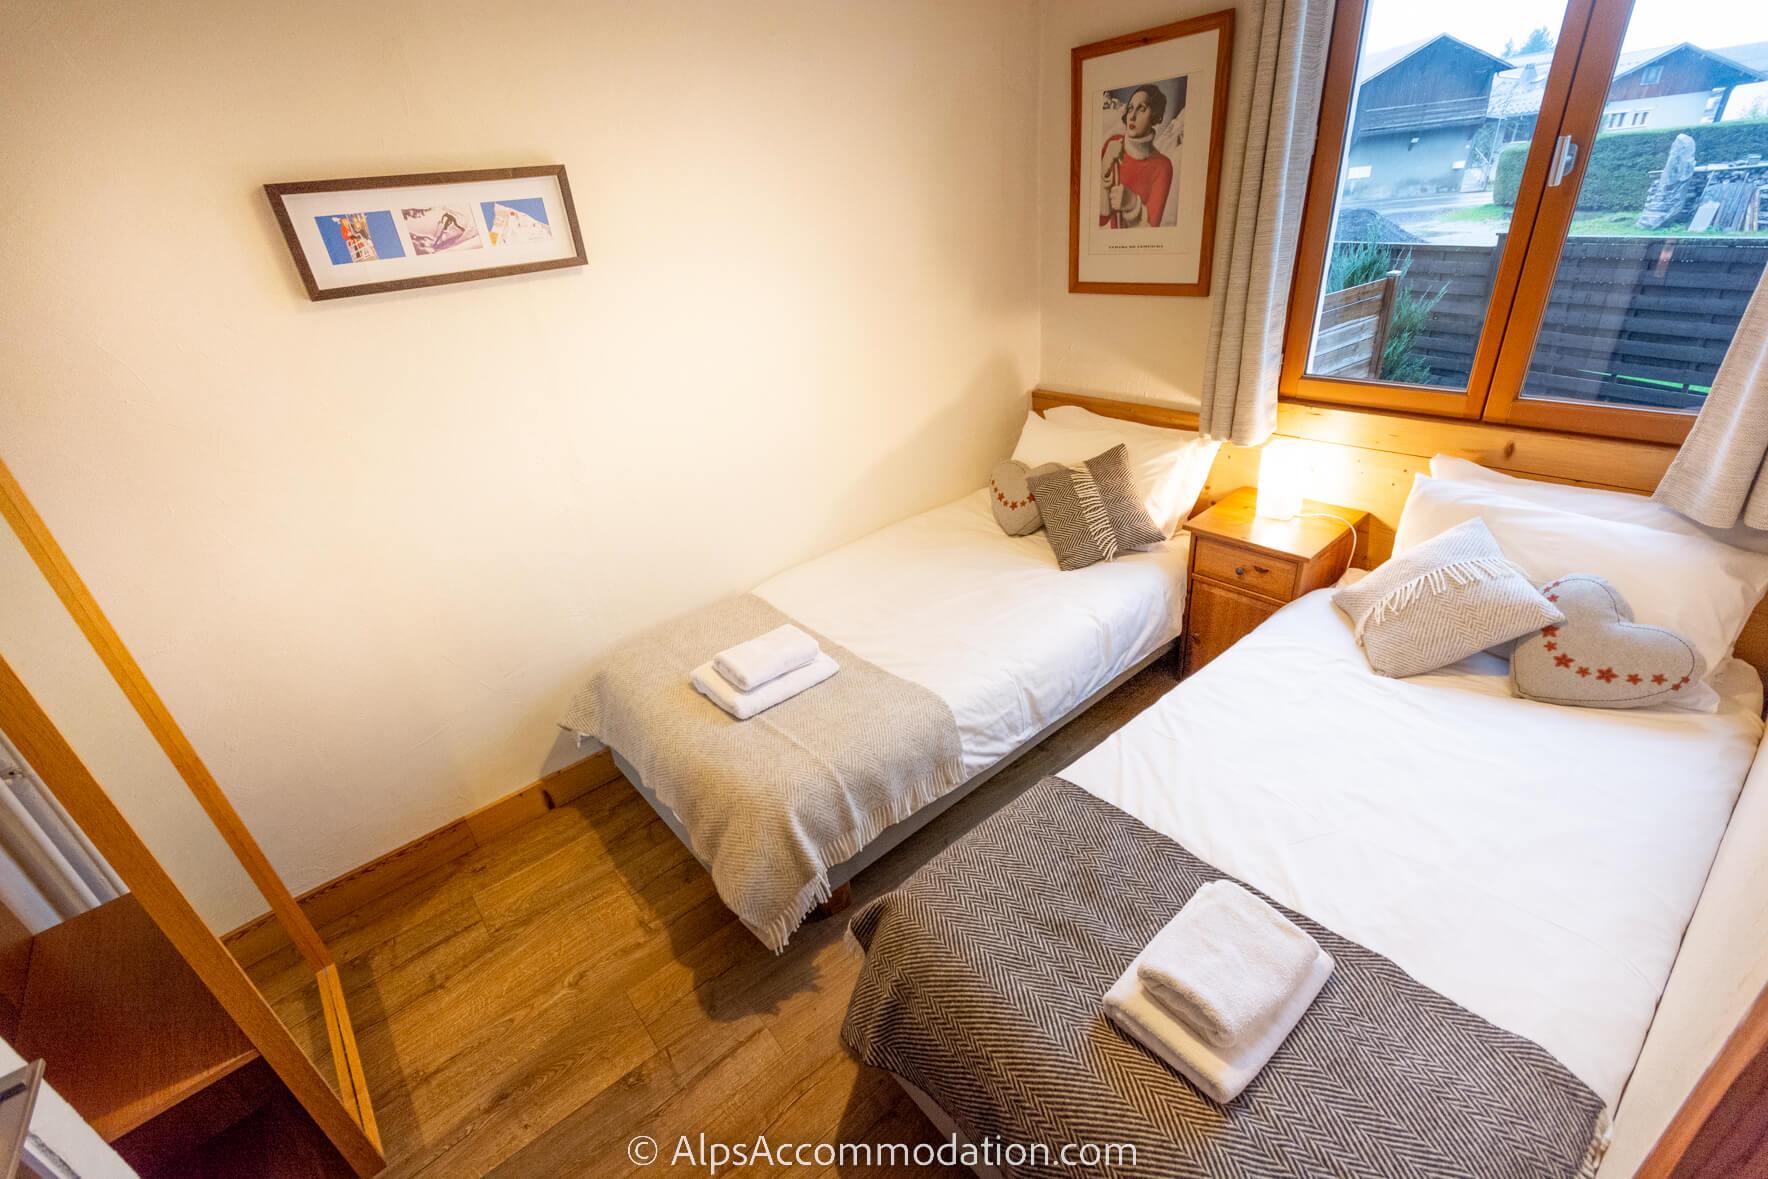 Chalet Moccand Samoëns - Twin bedroom on the lower floor with ensuite bathroom